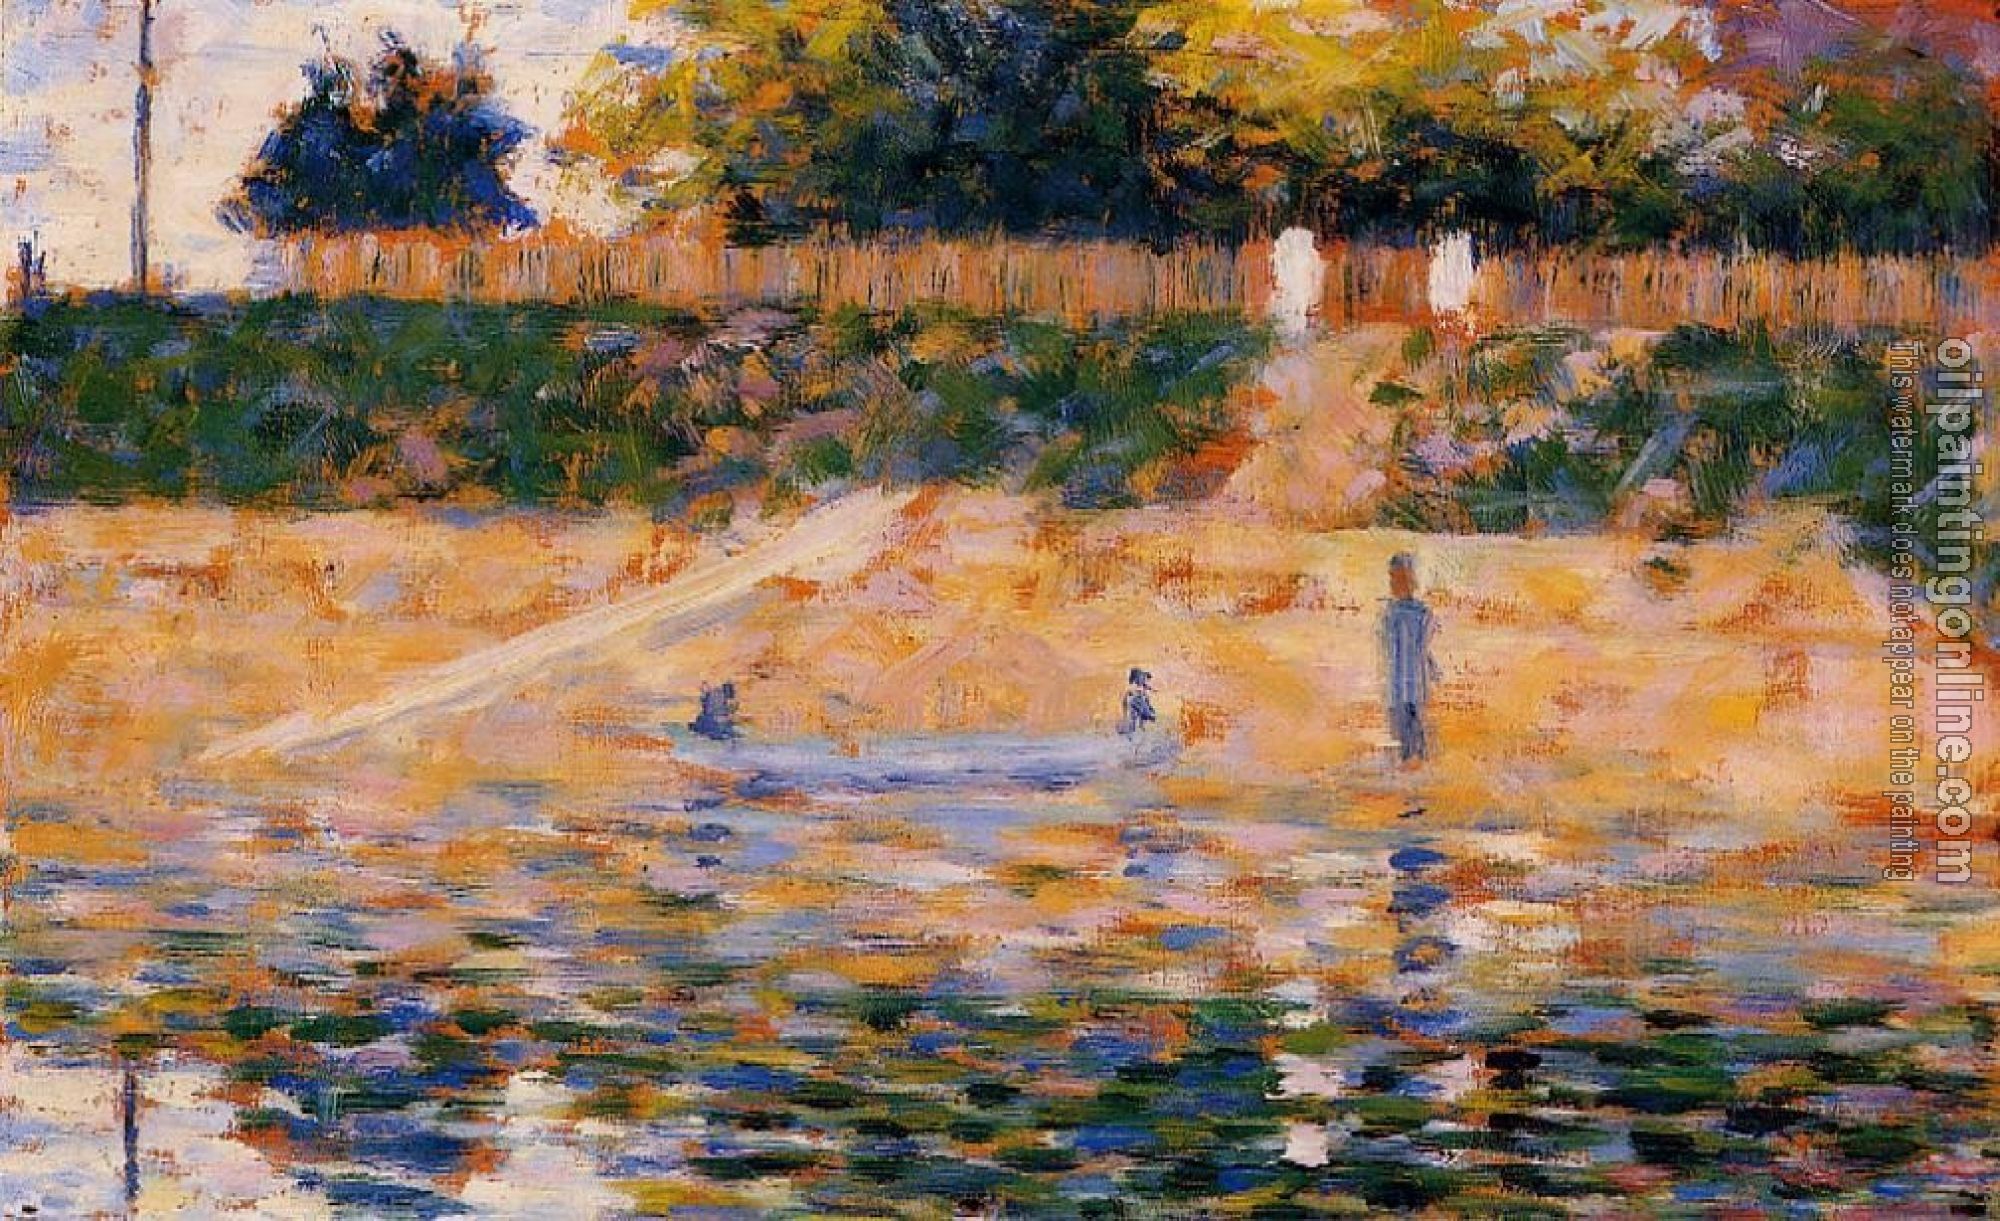 Seurat, Georges - Boats near the Beach at Asnieres